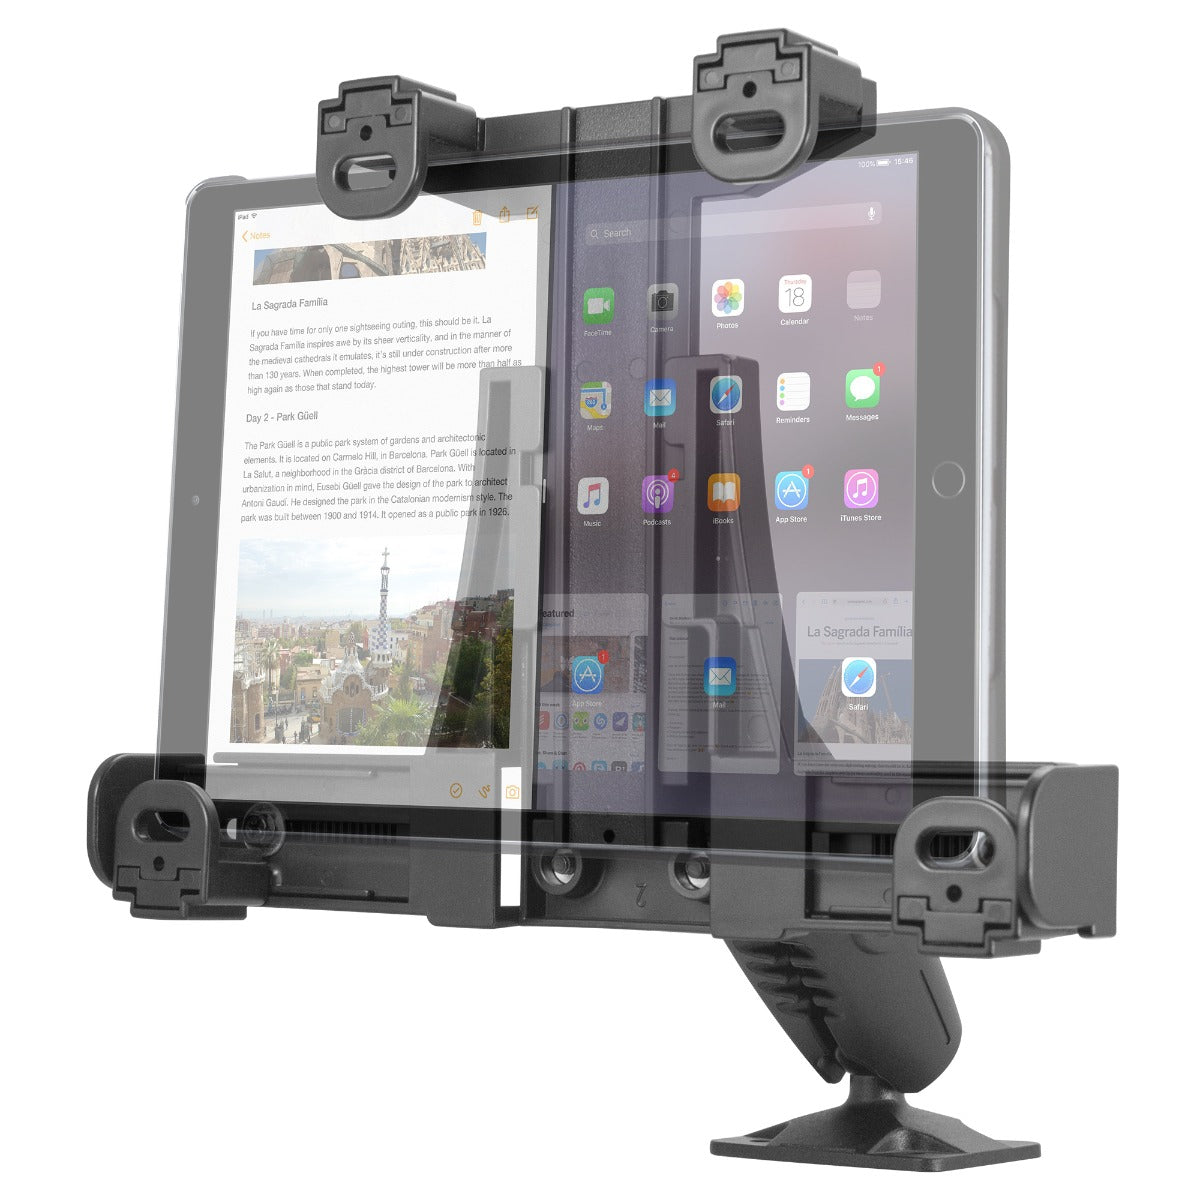 iBOLT Dock'n Lock Bizmount™ AMPS- Heavy Duty Industrial Composite Locking drill base Mount for all 7" - 10" tablets